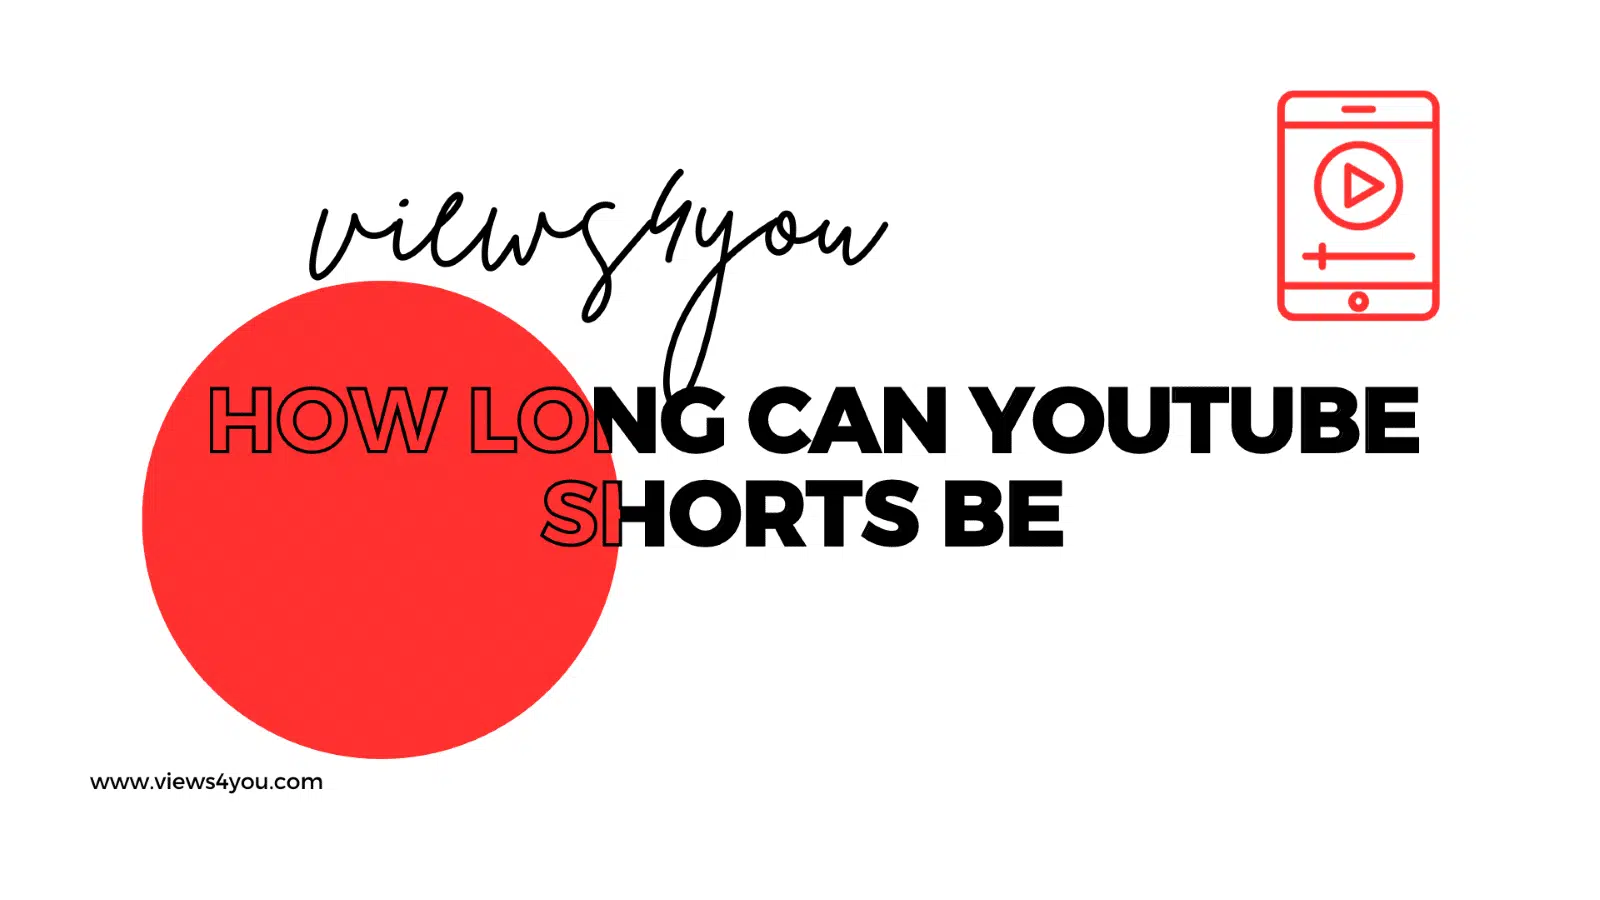 How long can YouTube shorts be